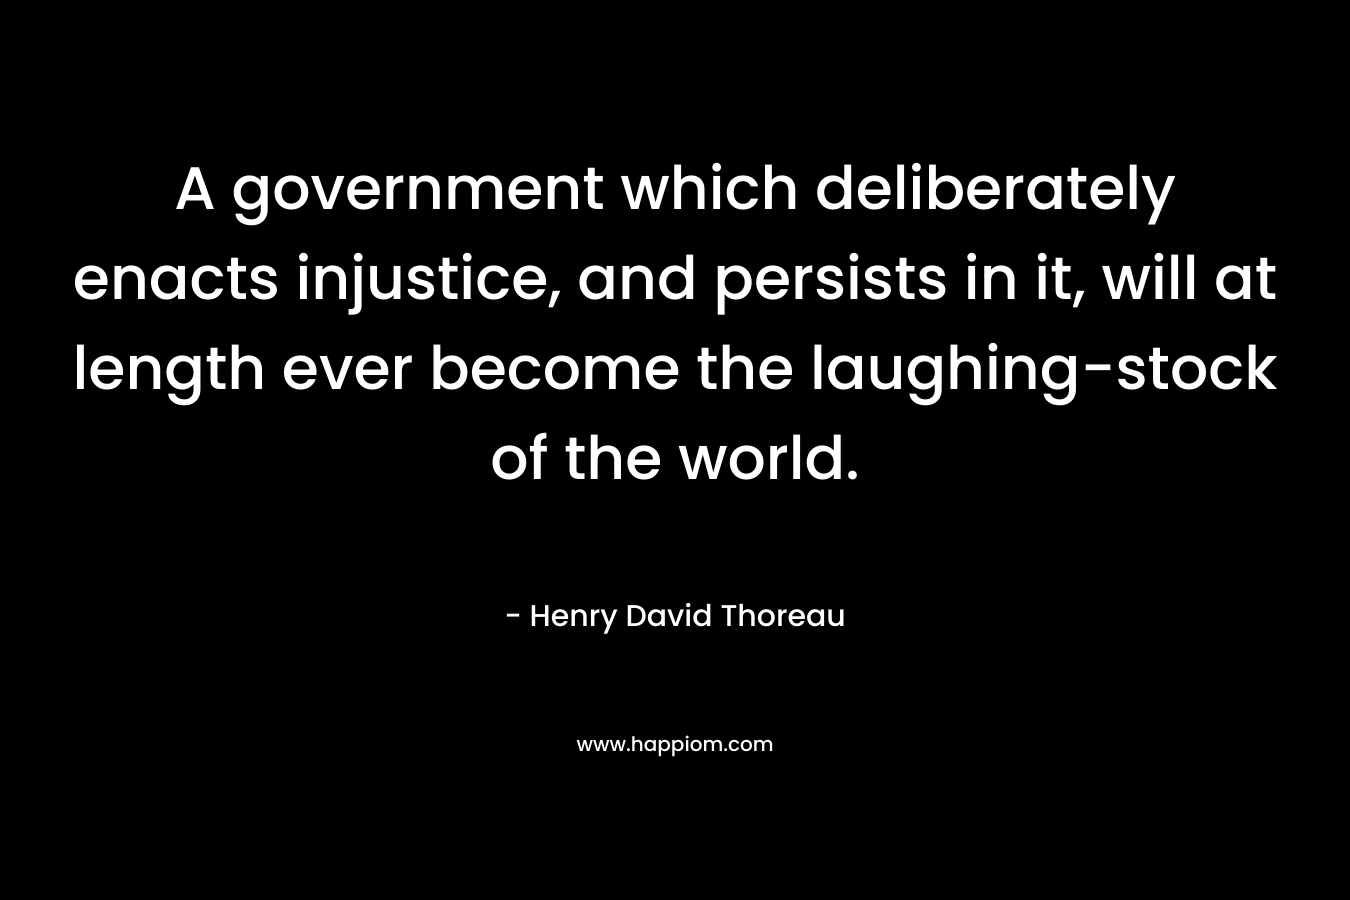 A government which deliberately enacts injustice, and persists in it, will at length ever become the laughing-stock of the world.